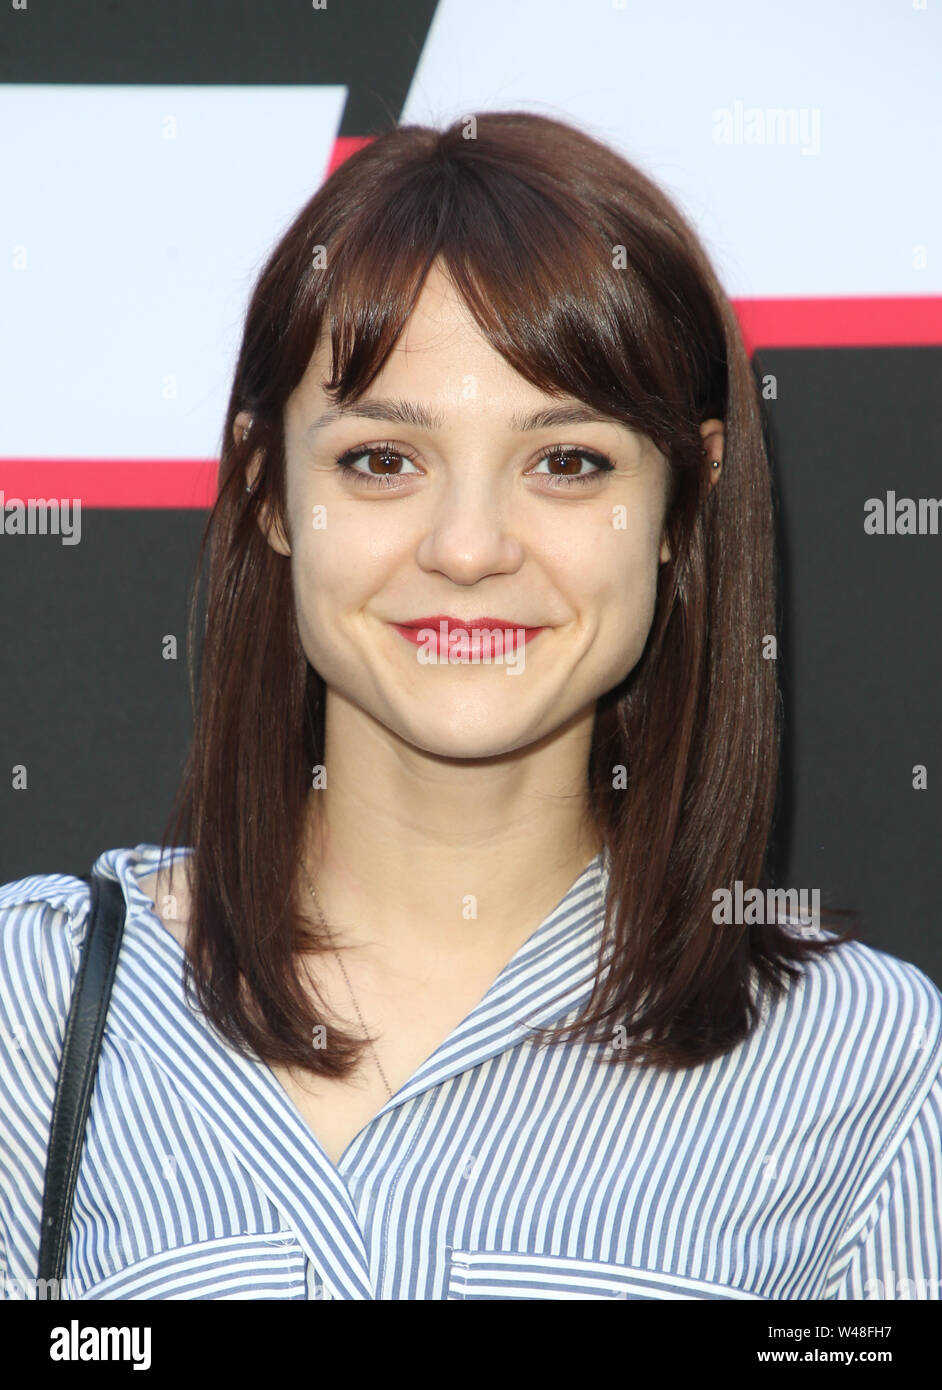 Premiere Of United Artists Releasing's 'Child's Play' Featuring: Kathryn Prescott Where: Hollywood, California, United States When: 19 Jun 2019 Credit: FayesVision/WENN.com Stock Photo